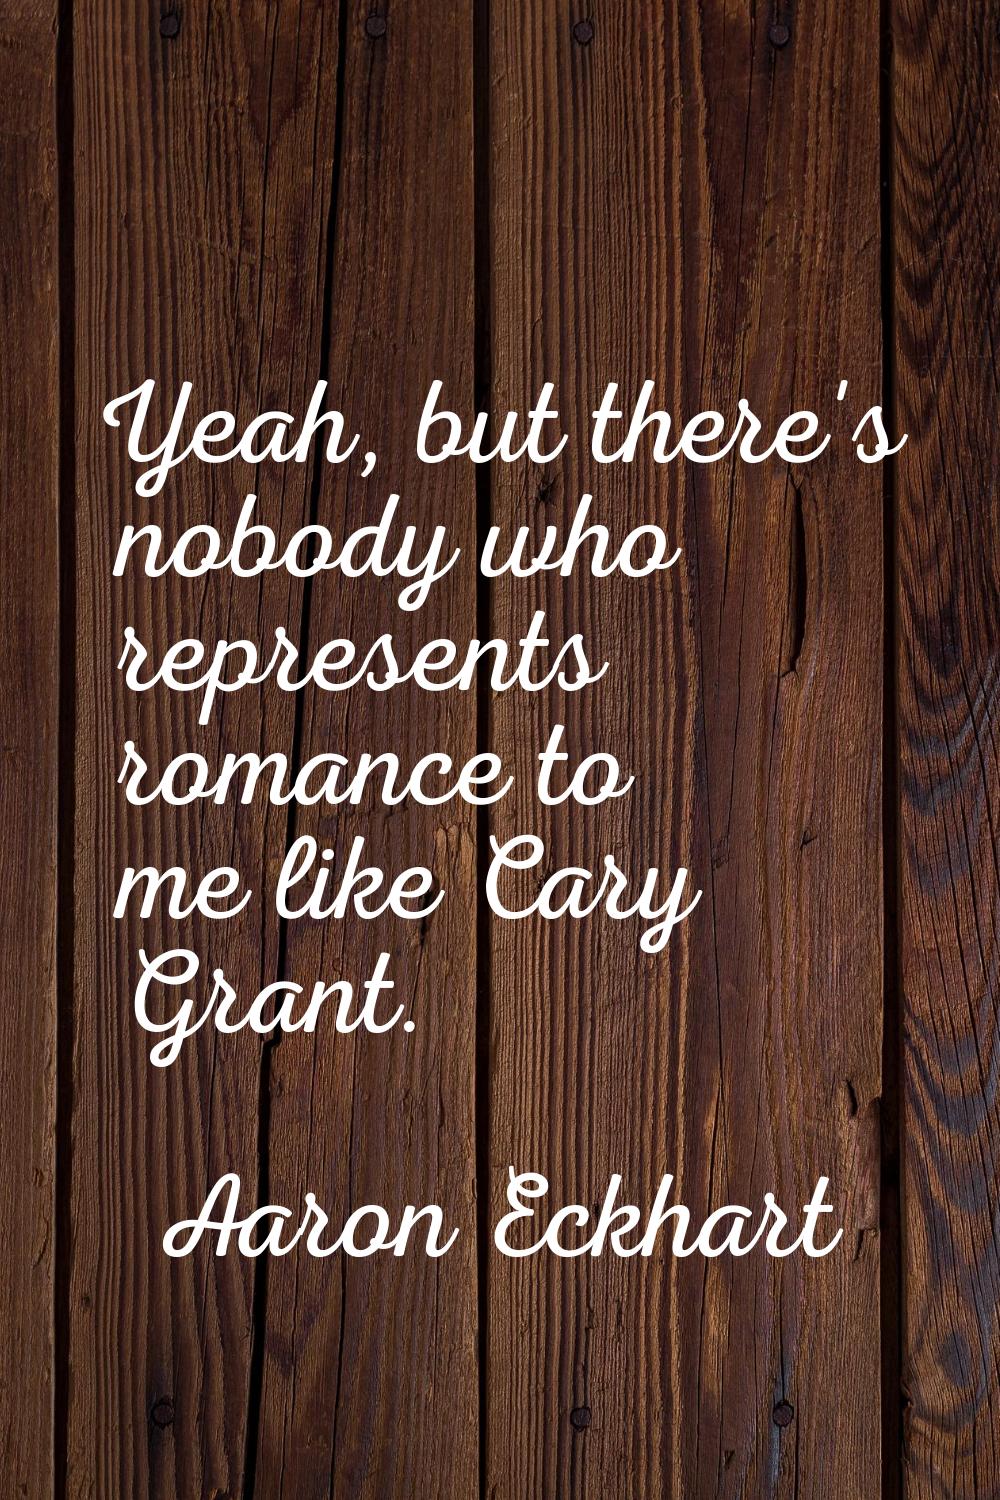 Yeah, but there's nobody who represents romance to me like Cary Grant.